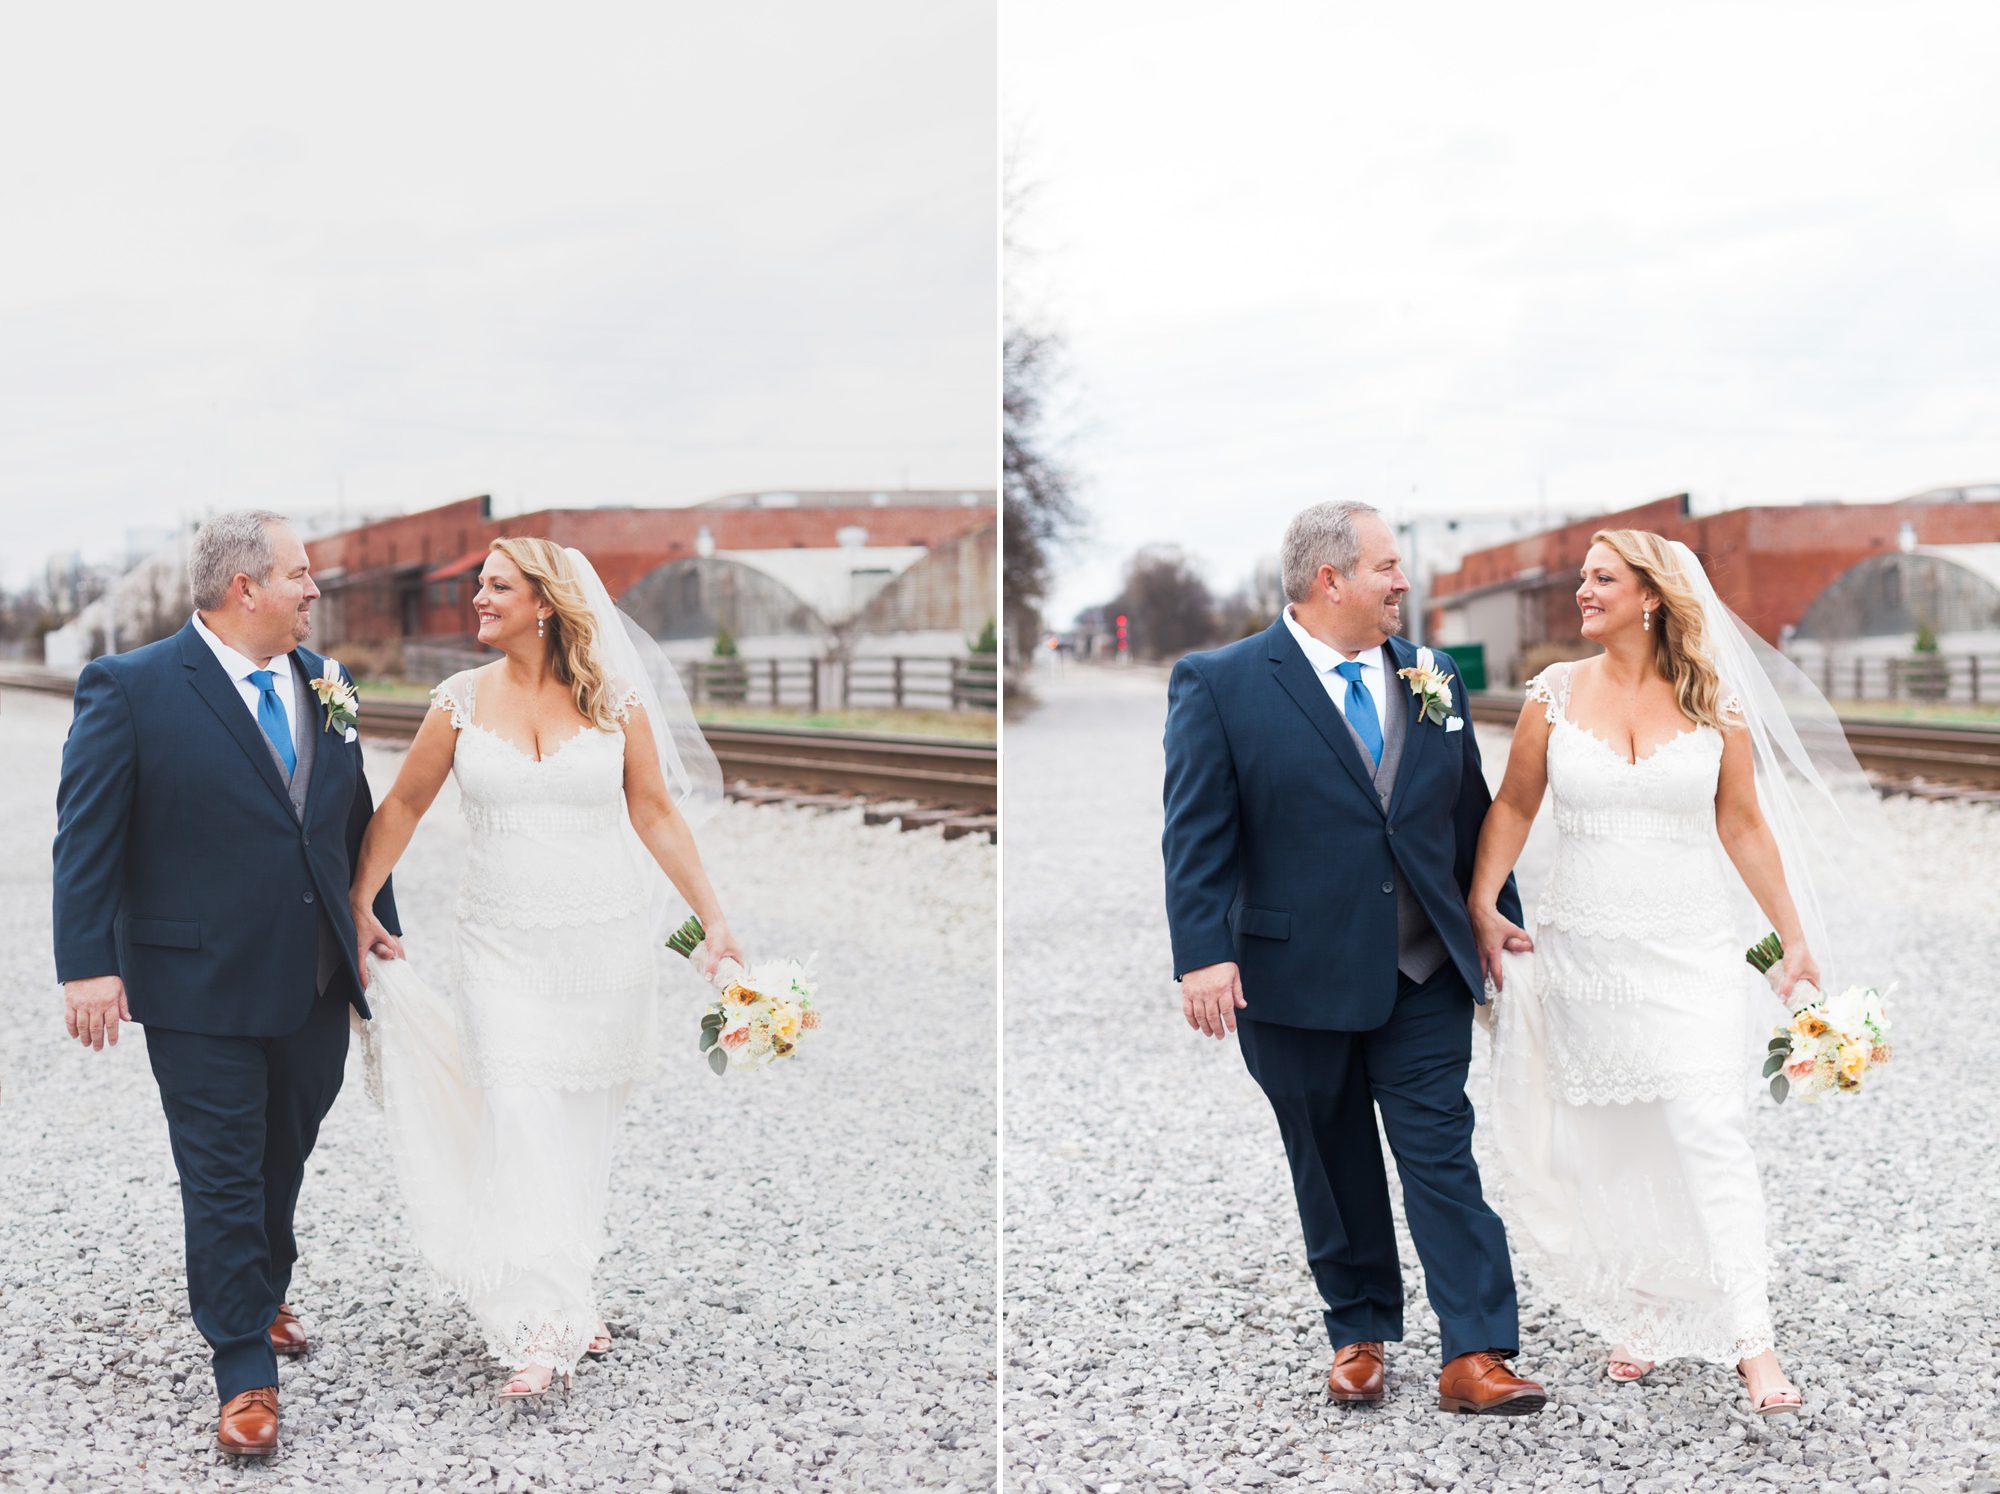 Bride and groom walk along railroad tracks before ceremony  at Houston Station, Nashville TN. Photos by Krista Lee Photography.